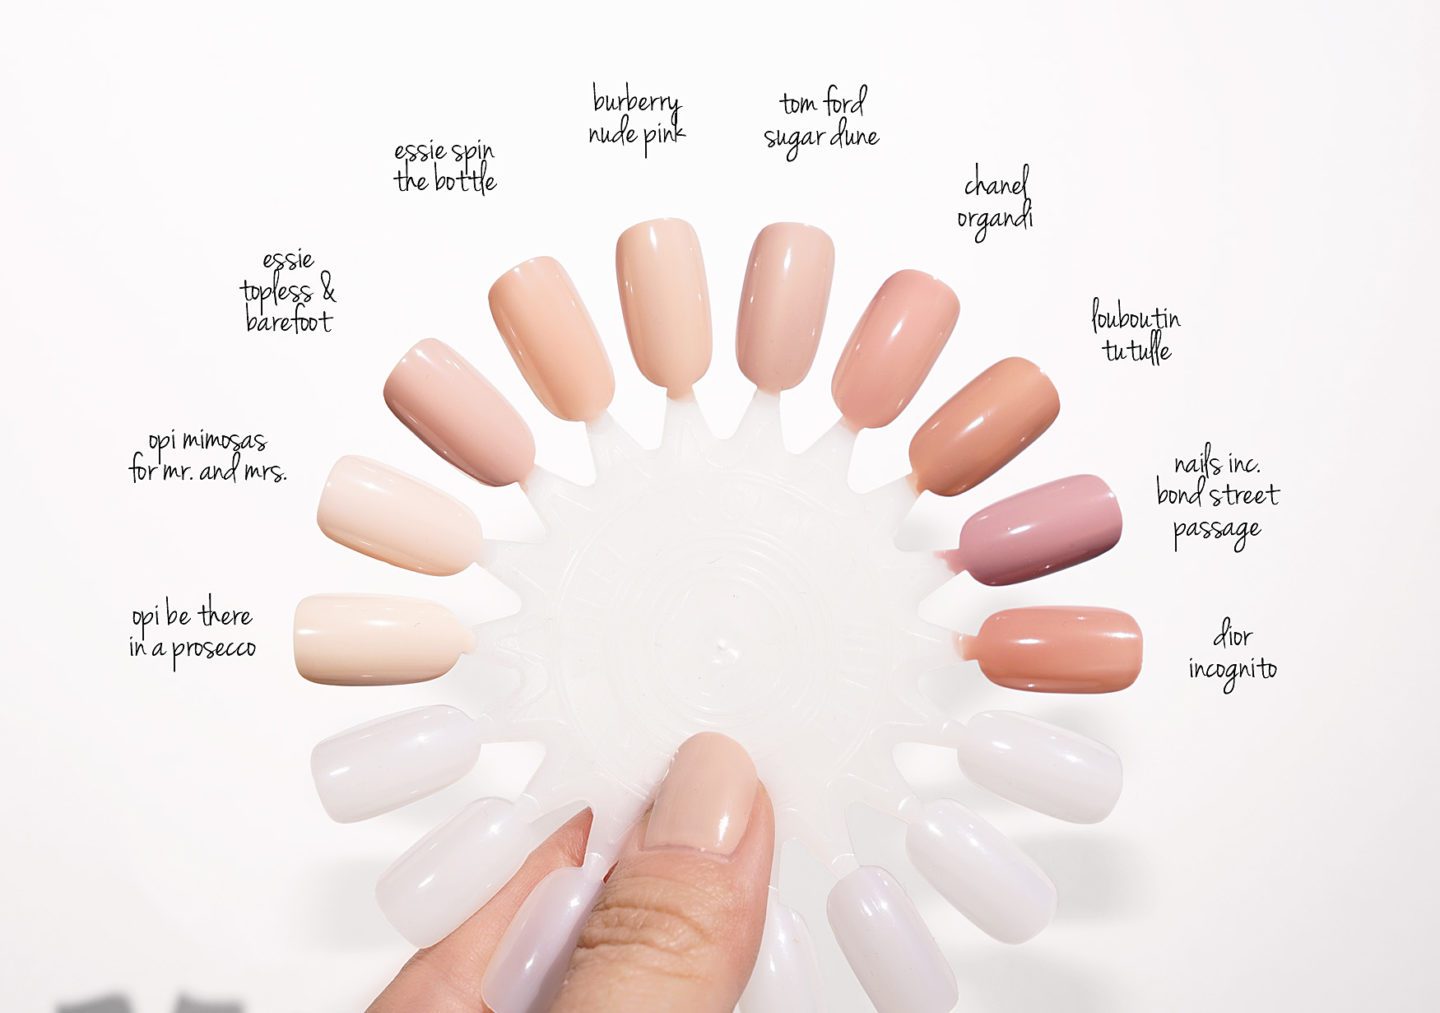 1. "Trendy Nail Polish Shades for a Stylish Look" - wide 3